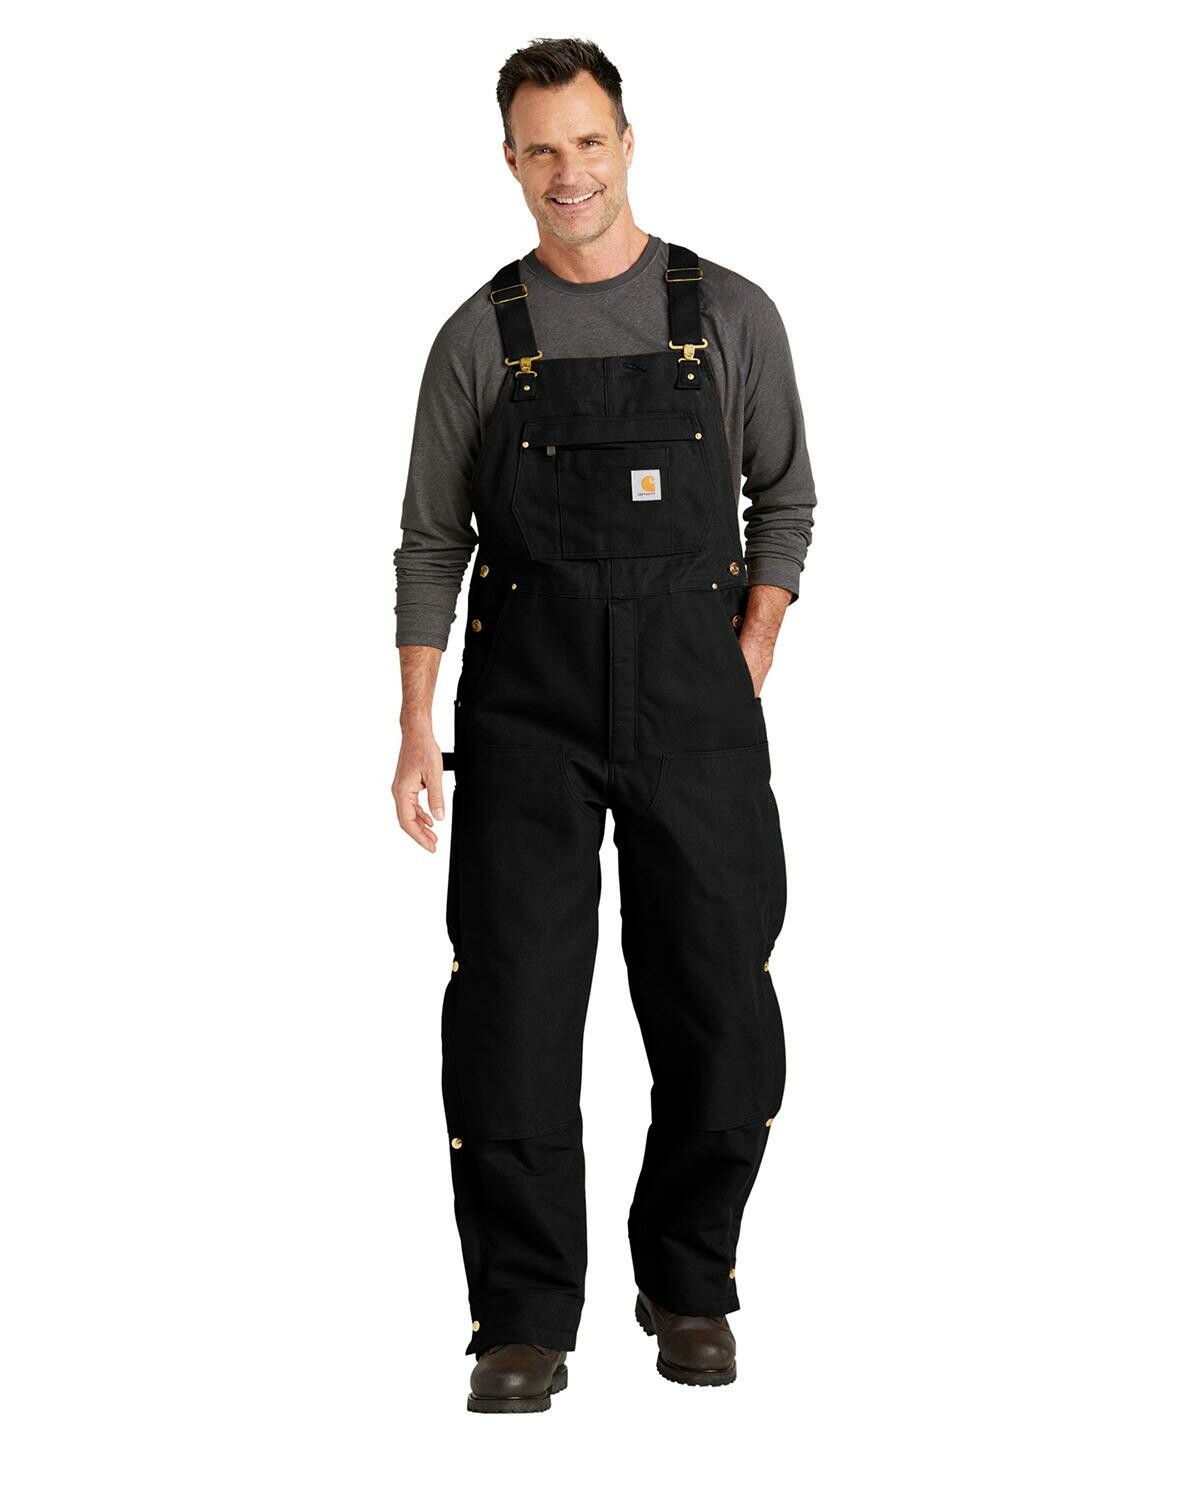 CARHARTT SUSPENDERS - clothing & accessories - by owner - apparel